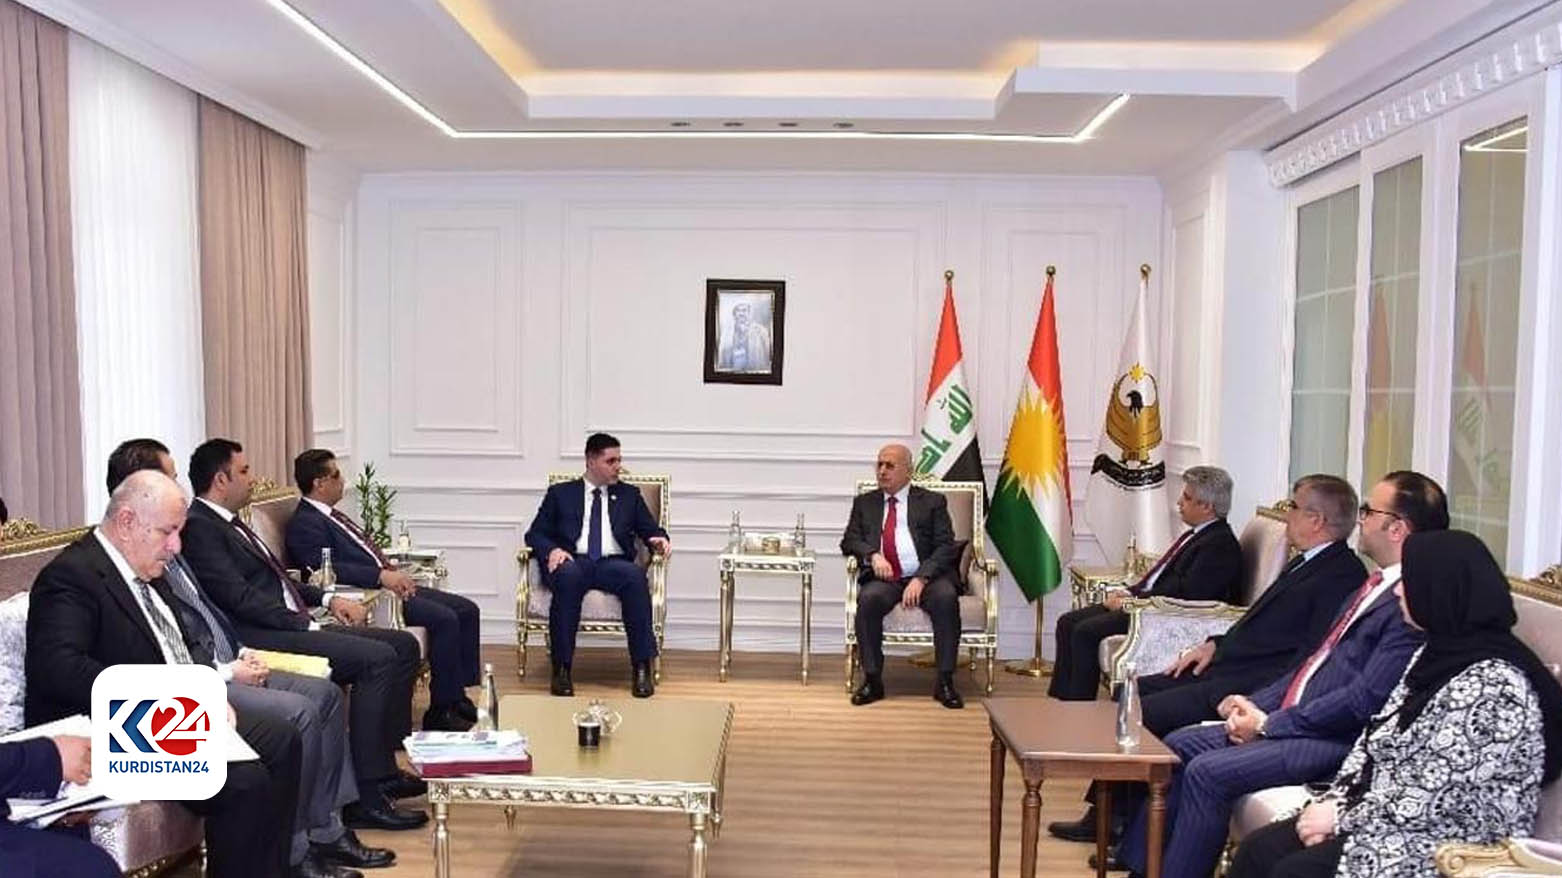 The meeting between KRG and the Iraqi Federal Board of Supreme Audit delegation. (Photo: KRG)